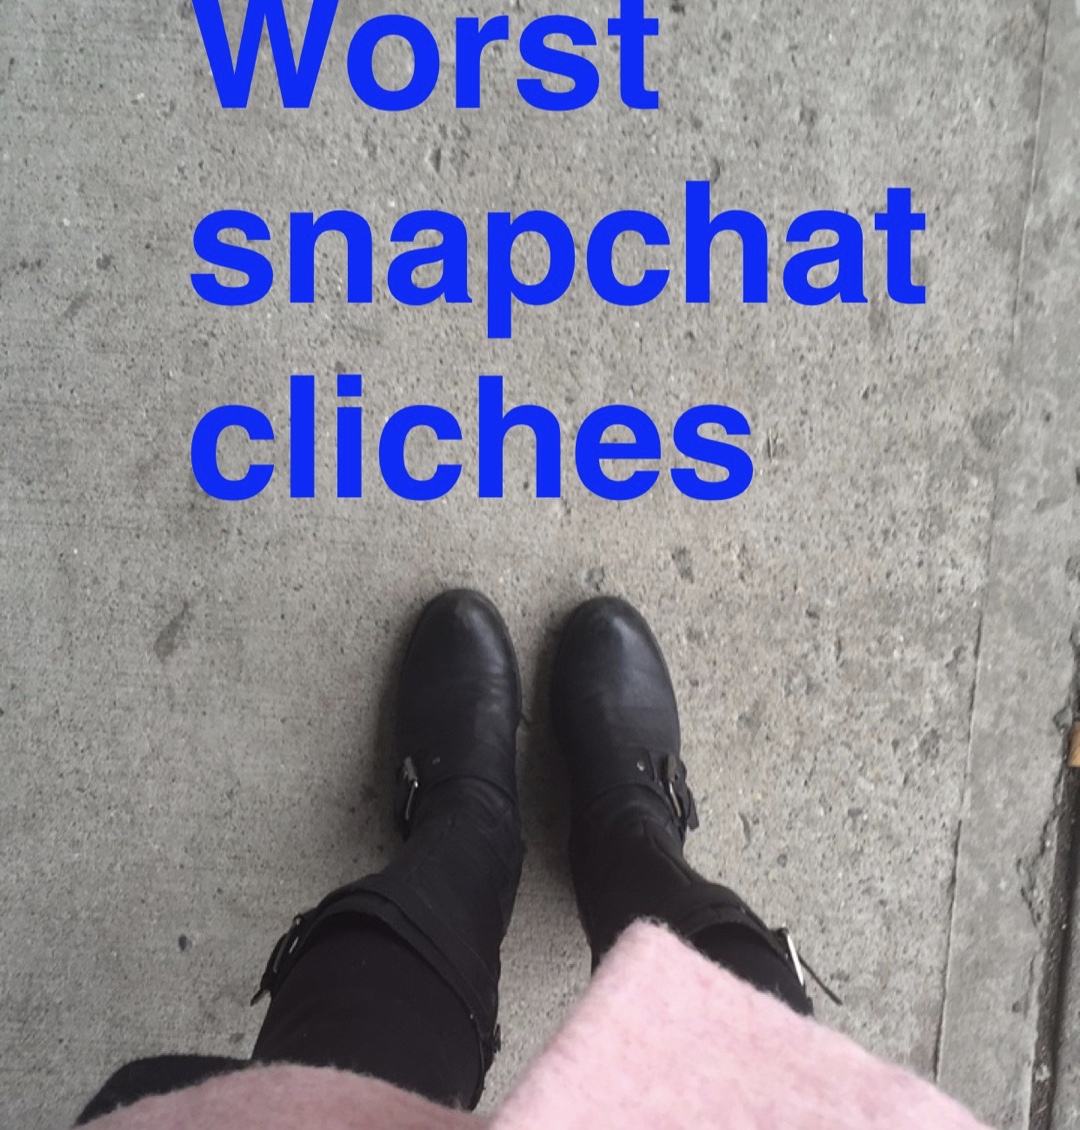 The Best of the Worst: Top 20 Snapchat Clichés